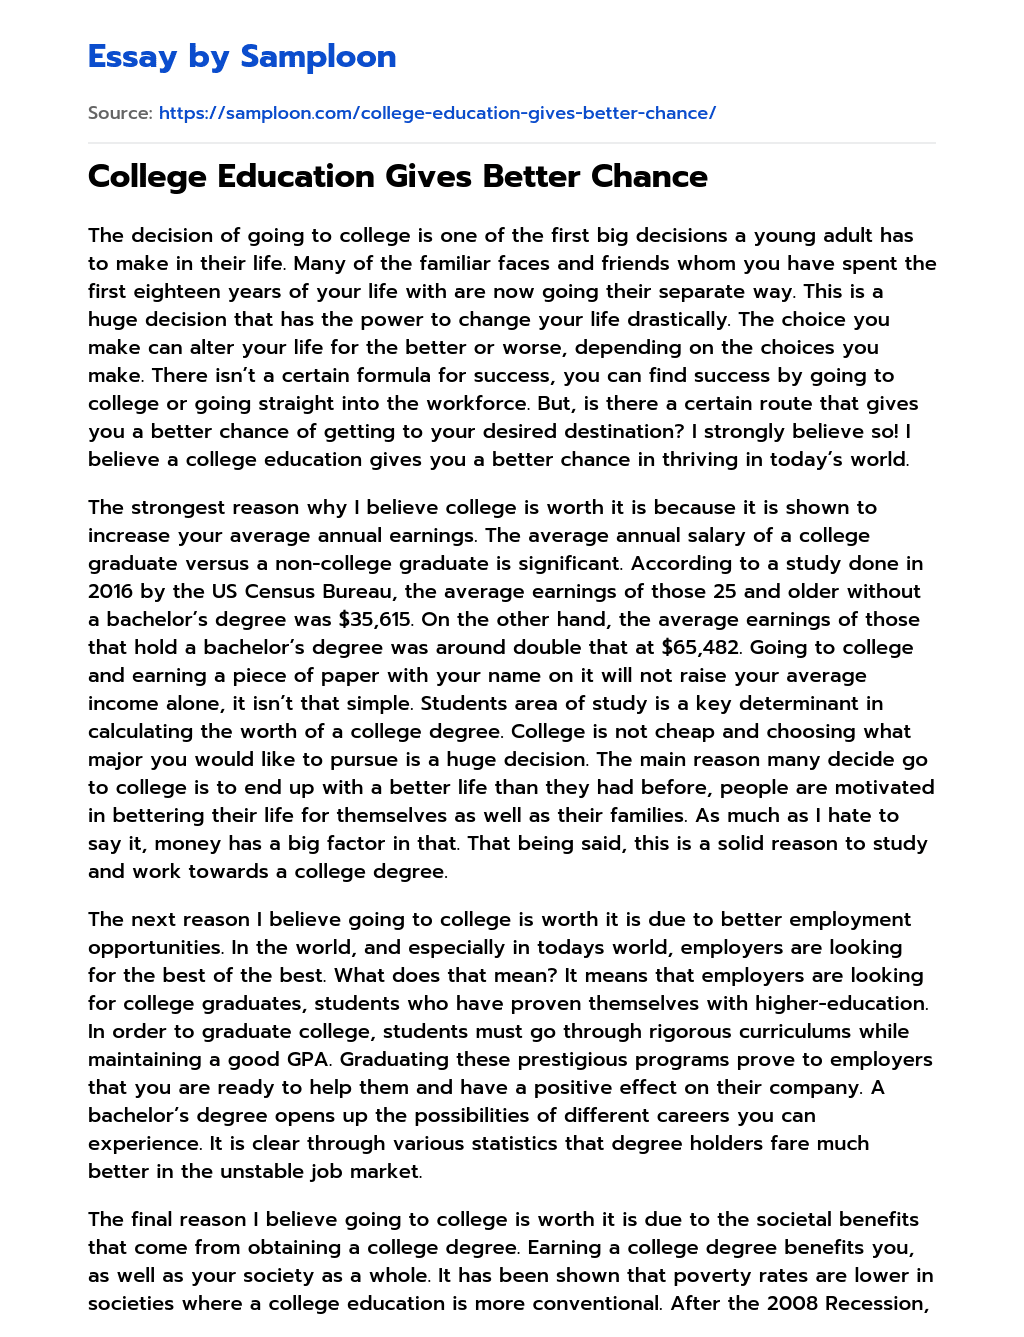 College Education Gives Better Chance essay